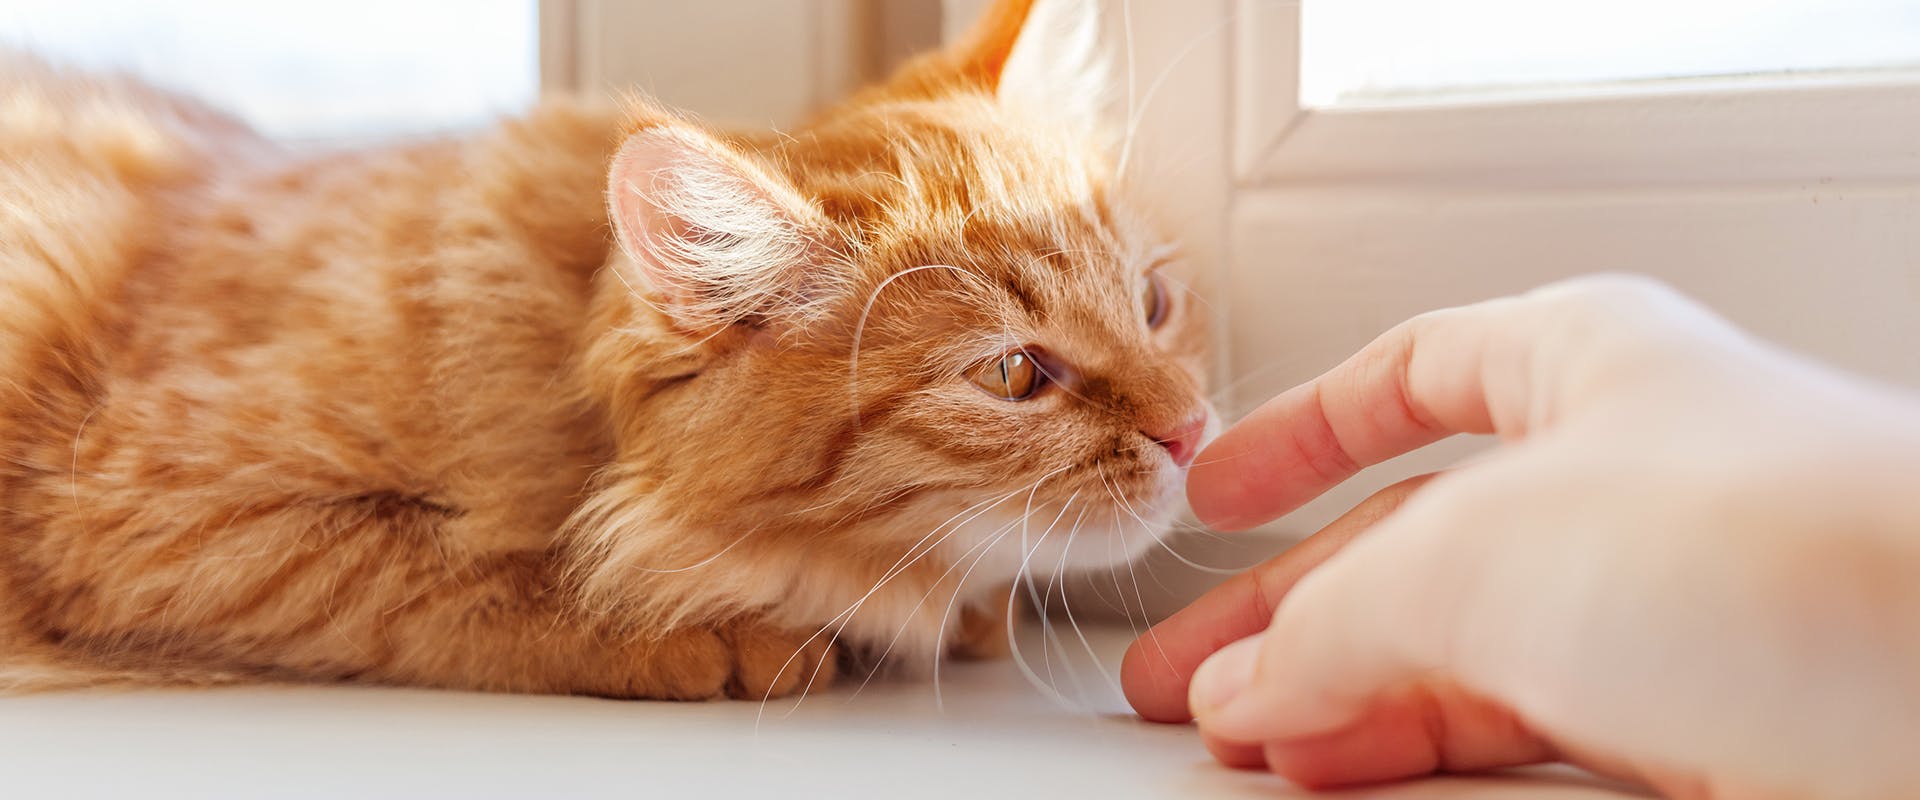 A cat sniffing a person's hand